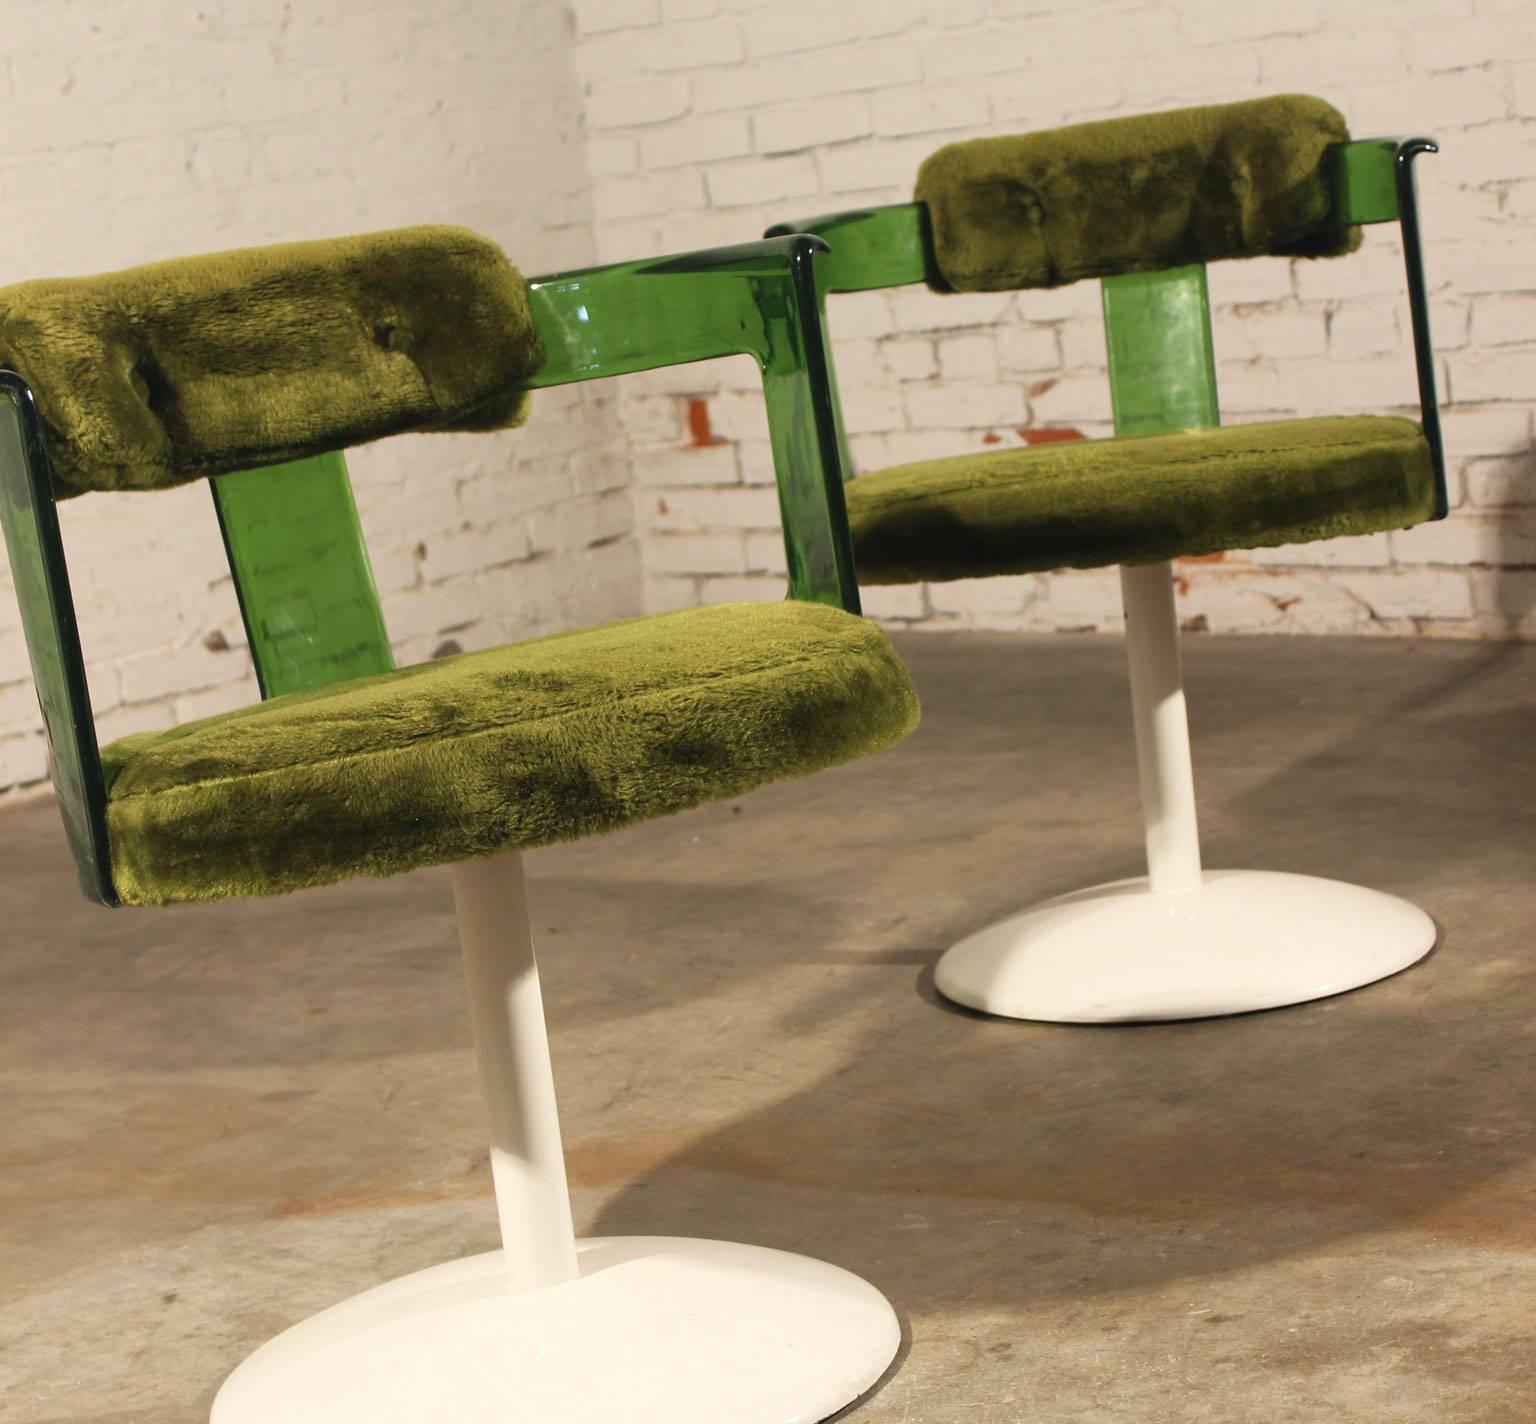 Awesome pair of Mod Daystrom Furniture tulip style green lucite and faux fur swivel chairs circa 1970 mid-century modern. In wonderful vintage condition.

OMG!!! Are these not the most cool vintage mid-century modern chairs? Circa 1970 Mod green